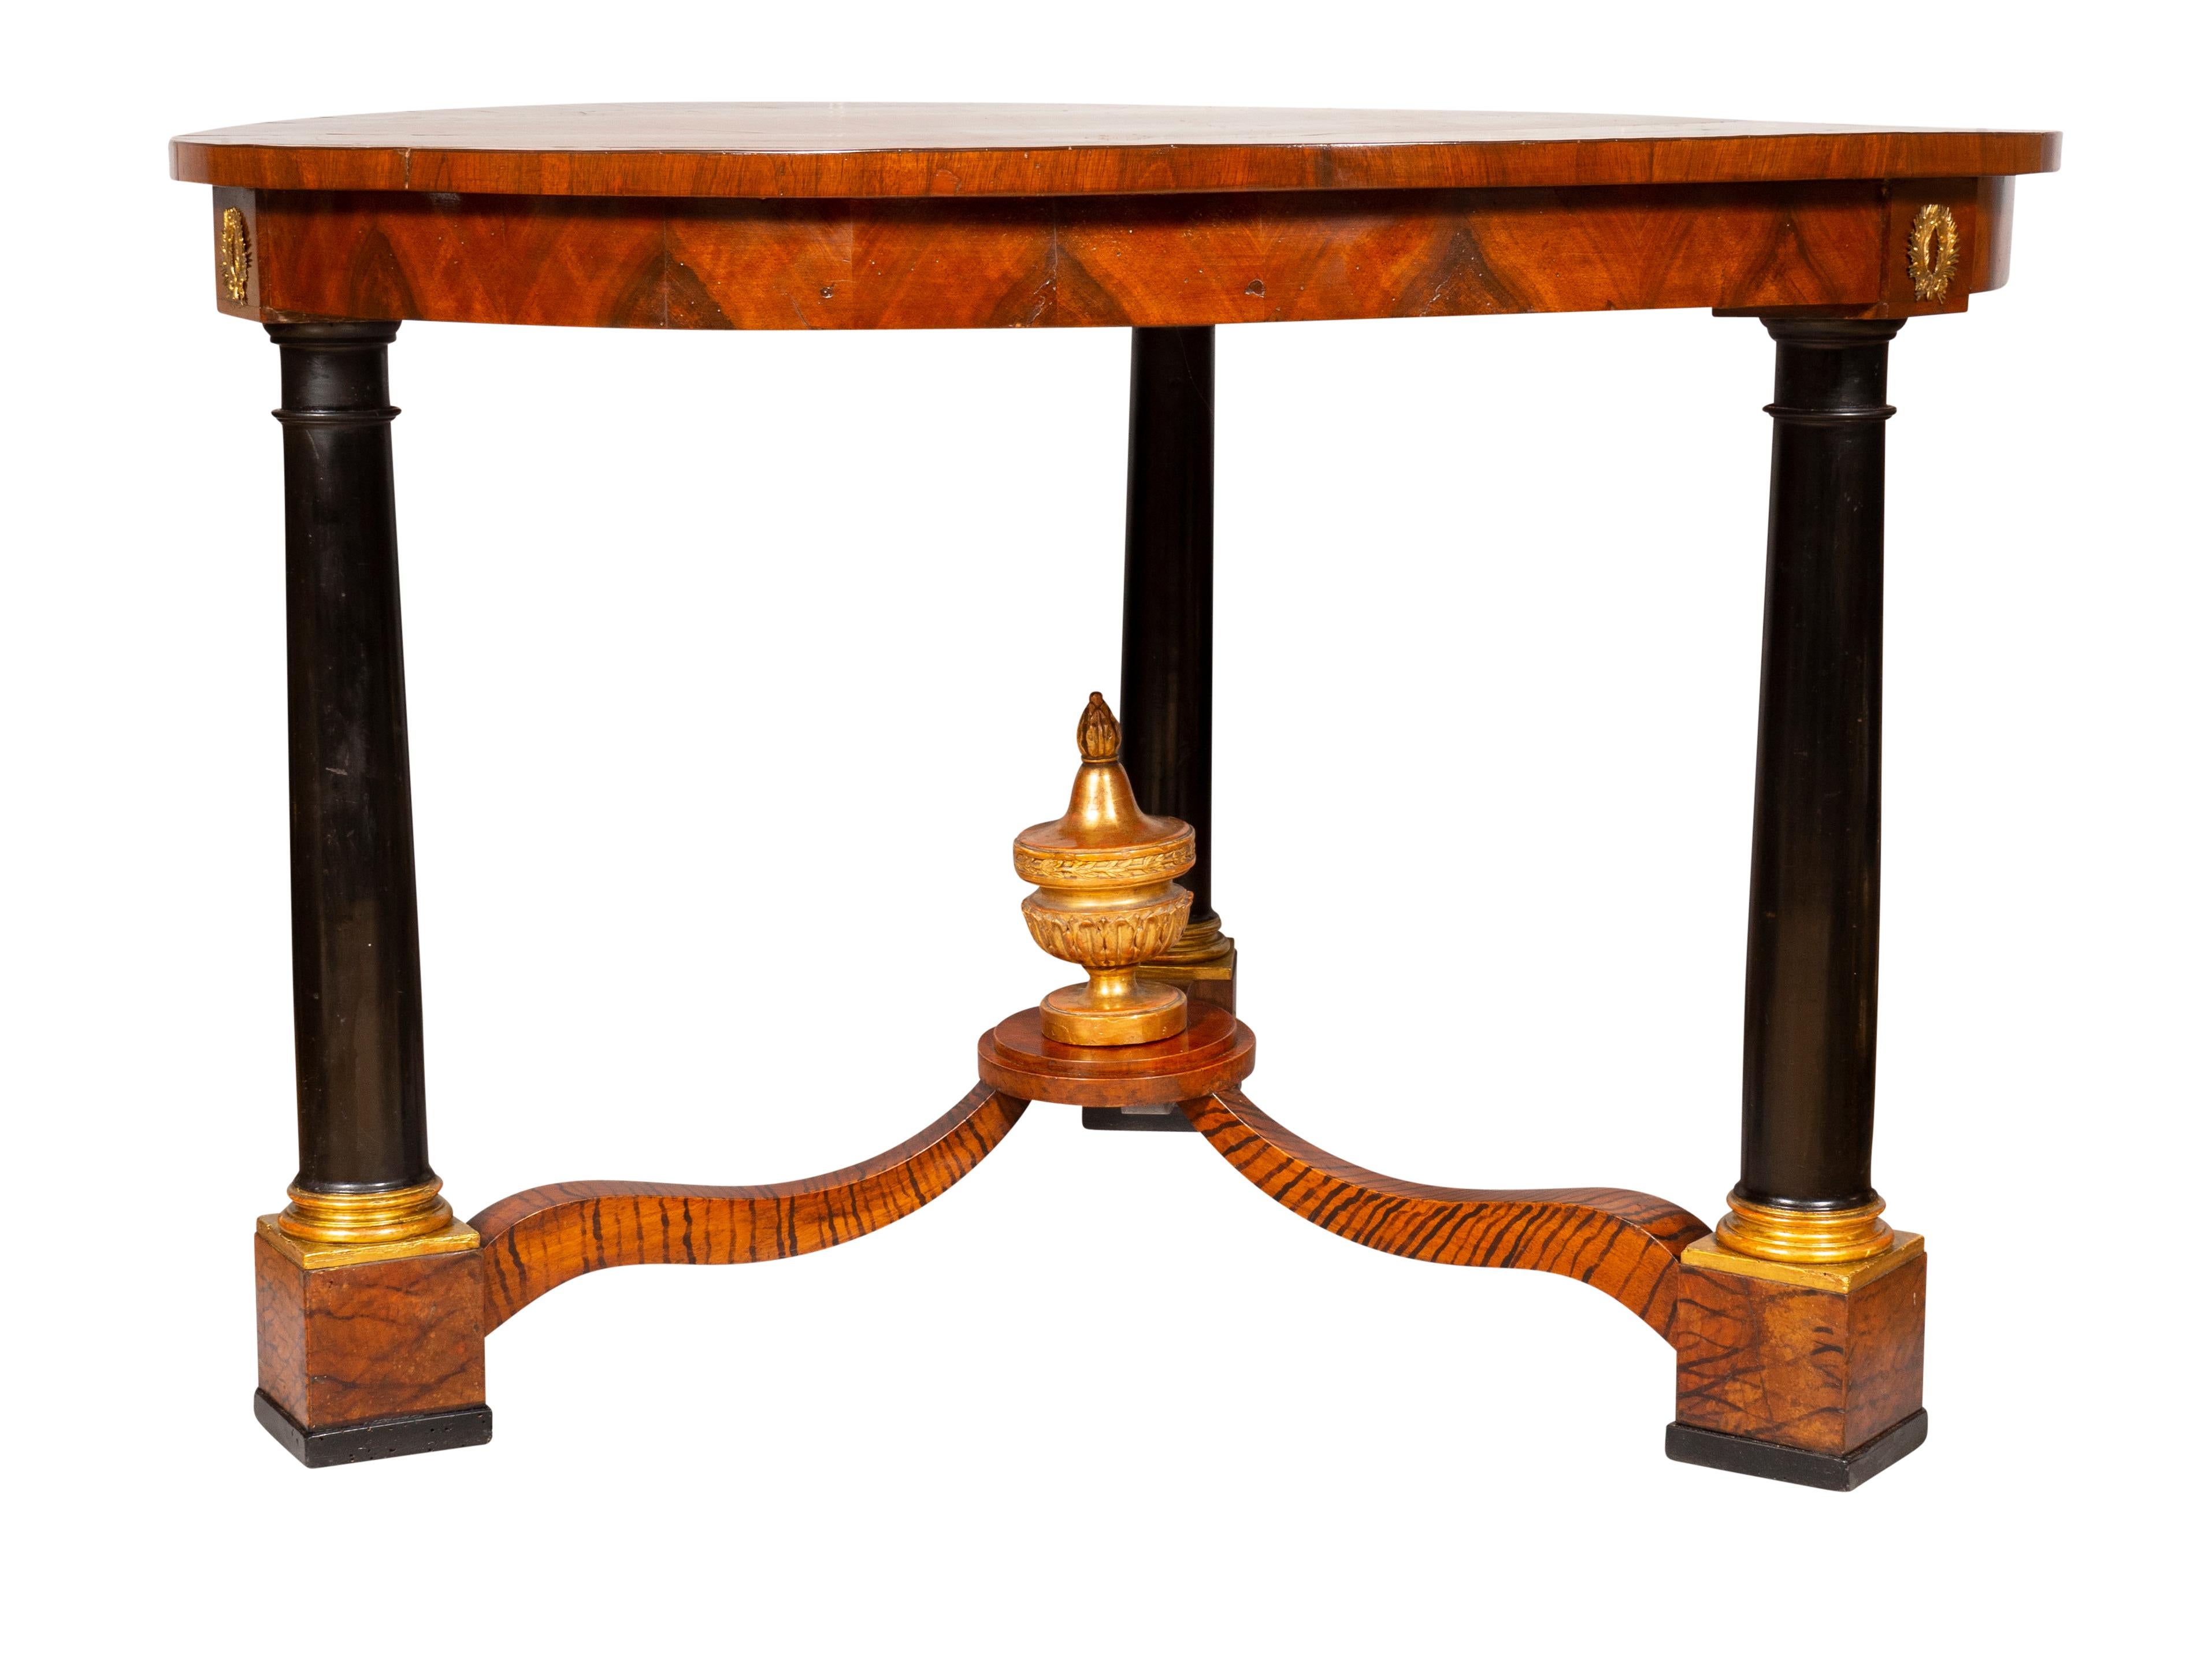 Circular top with starburst inlays over a conforming frieze with gilt metal wreaths at top of legs raised on three ebonized columns with faux painted stretcher and gilt wood central finial.